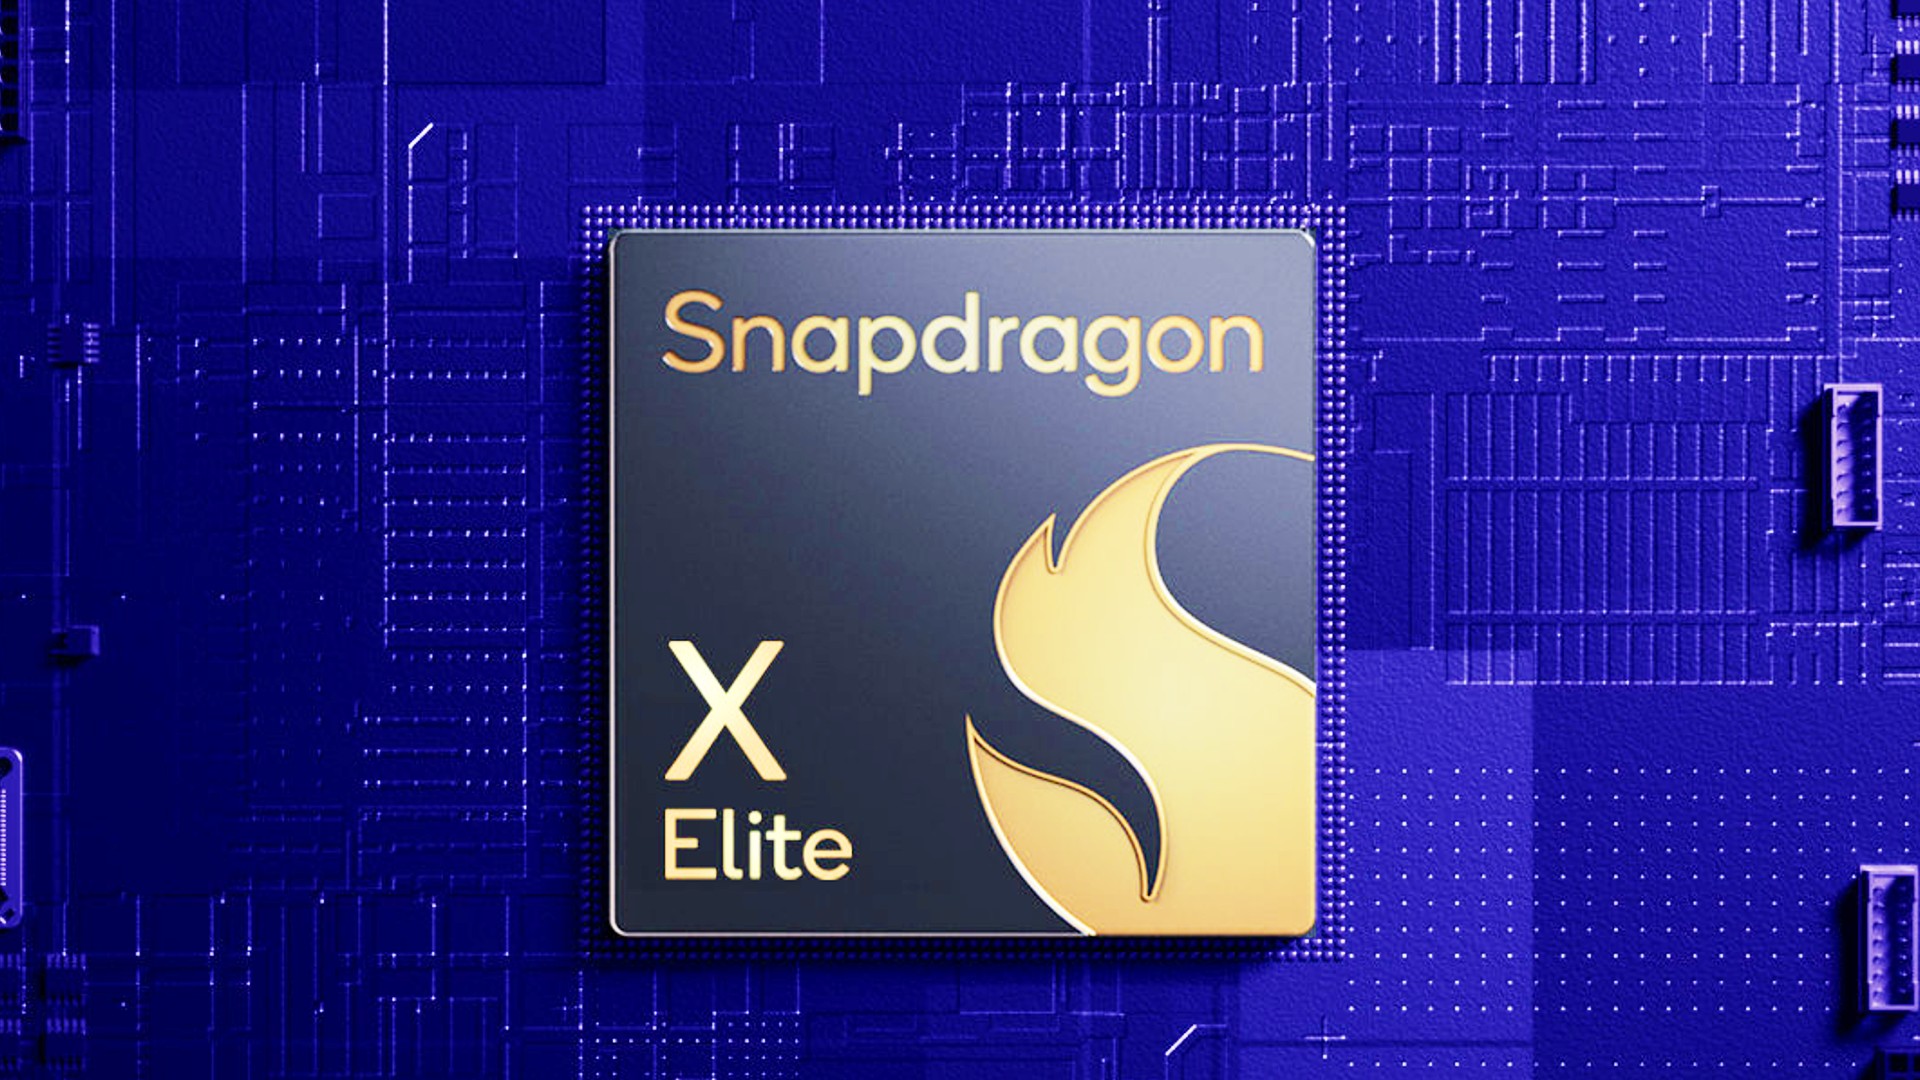 Snapdragon X gaming laptop performance proves disappointing